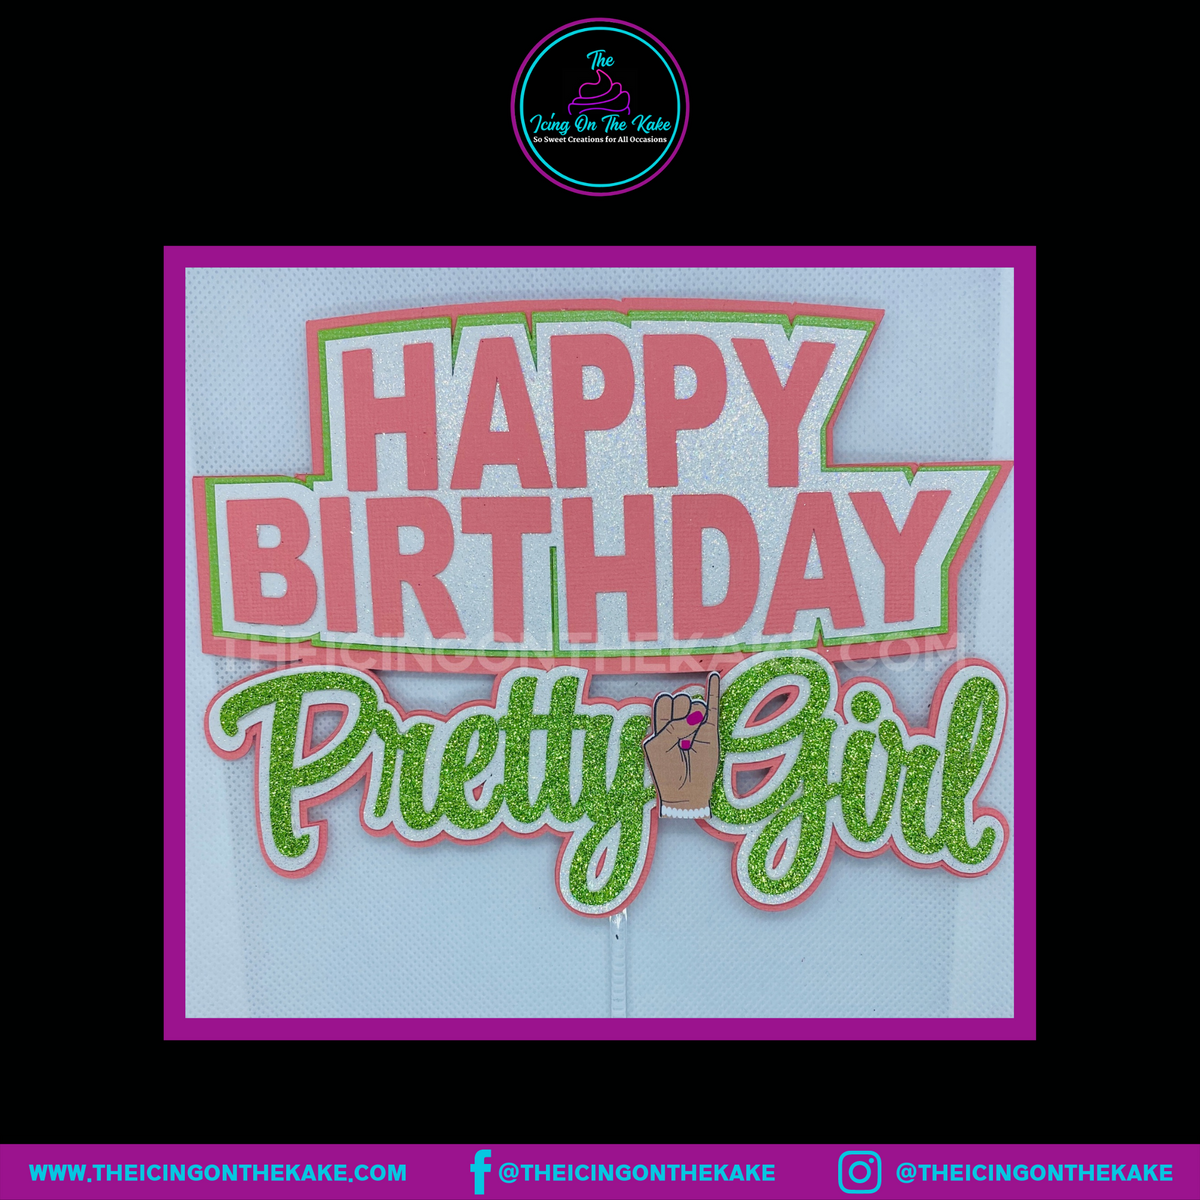 Happy Birthday/Congratulations Pretty Girl (AKA inspired) Cake Topper – The Icing On The Kake